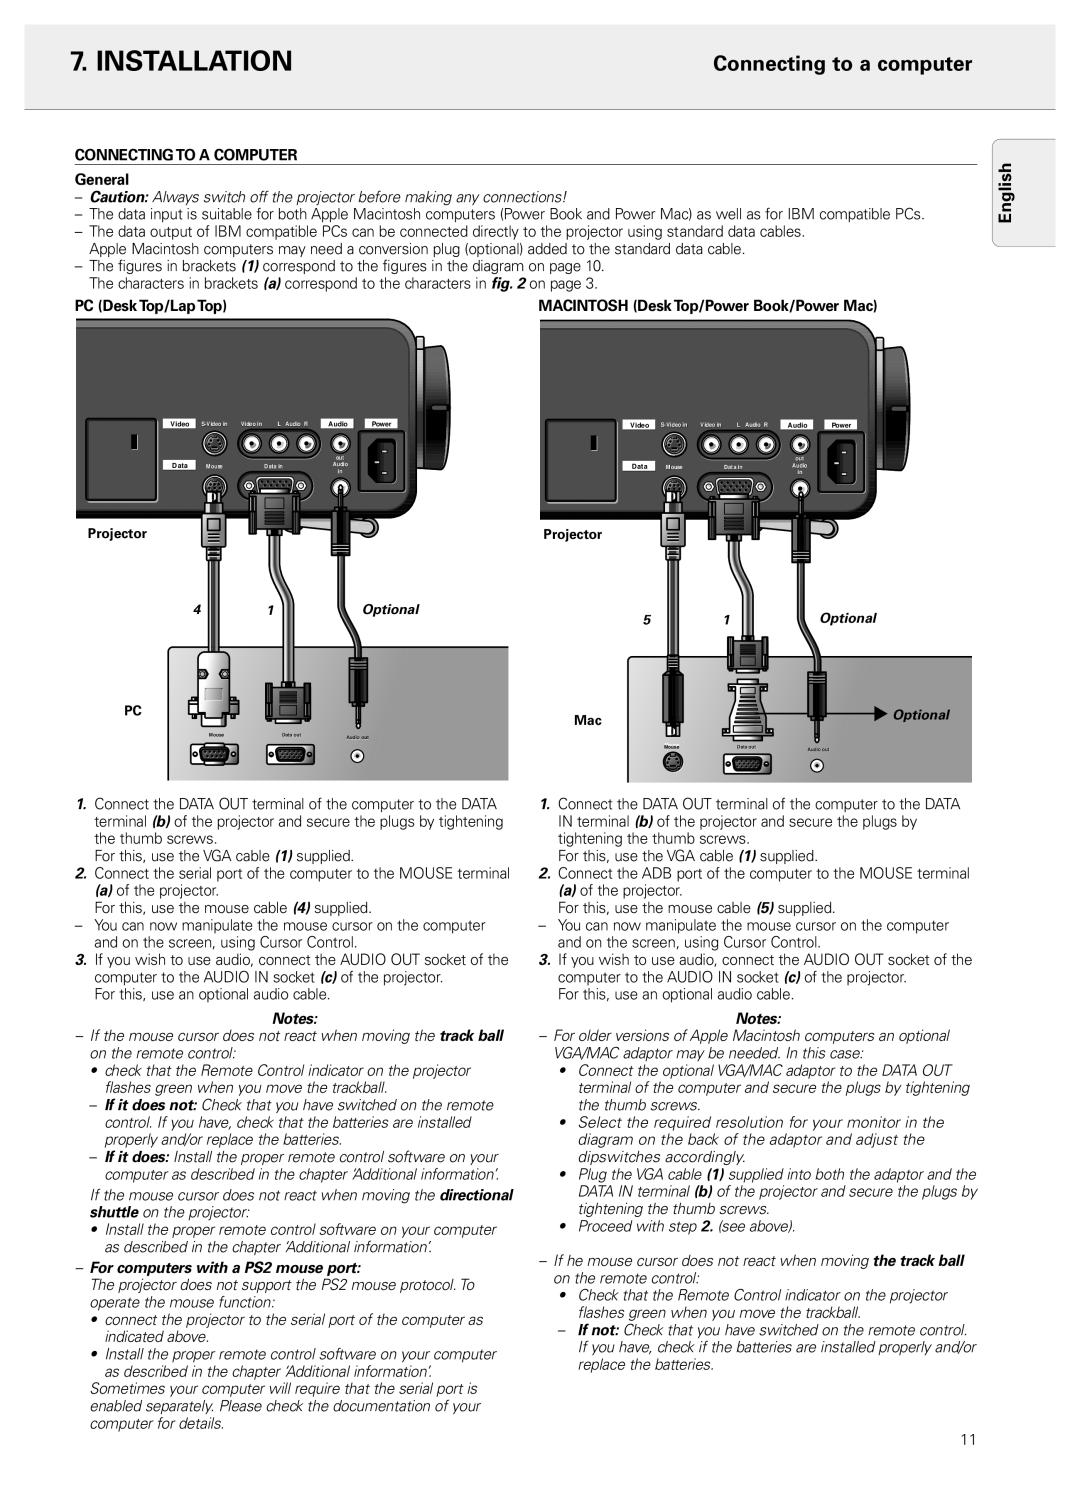 Philips 20 series, LC4043 manual Connecting to a computer, Installation, English, For computers with a PS2 mouse port 